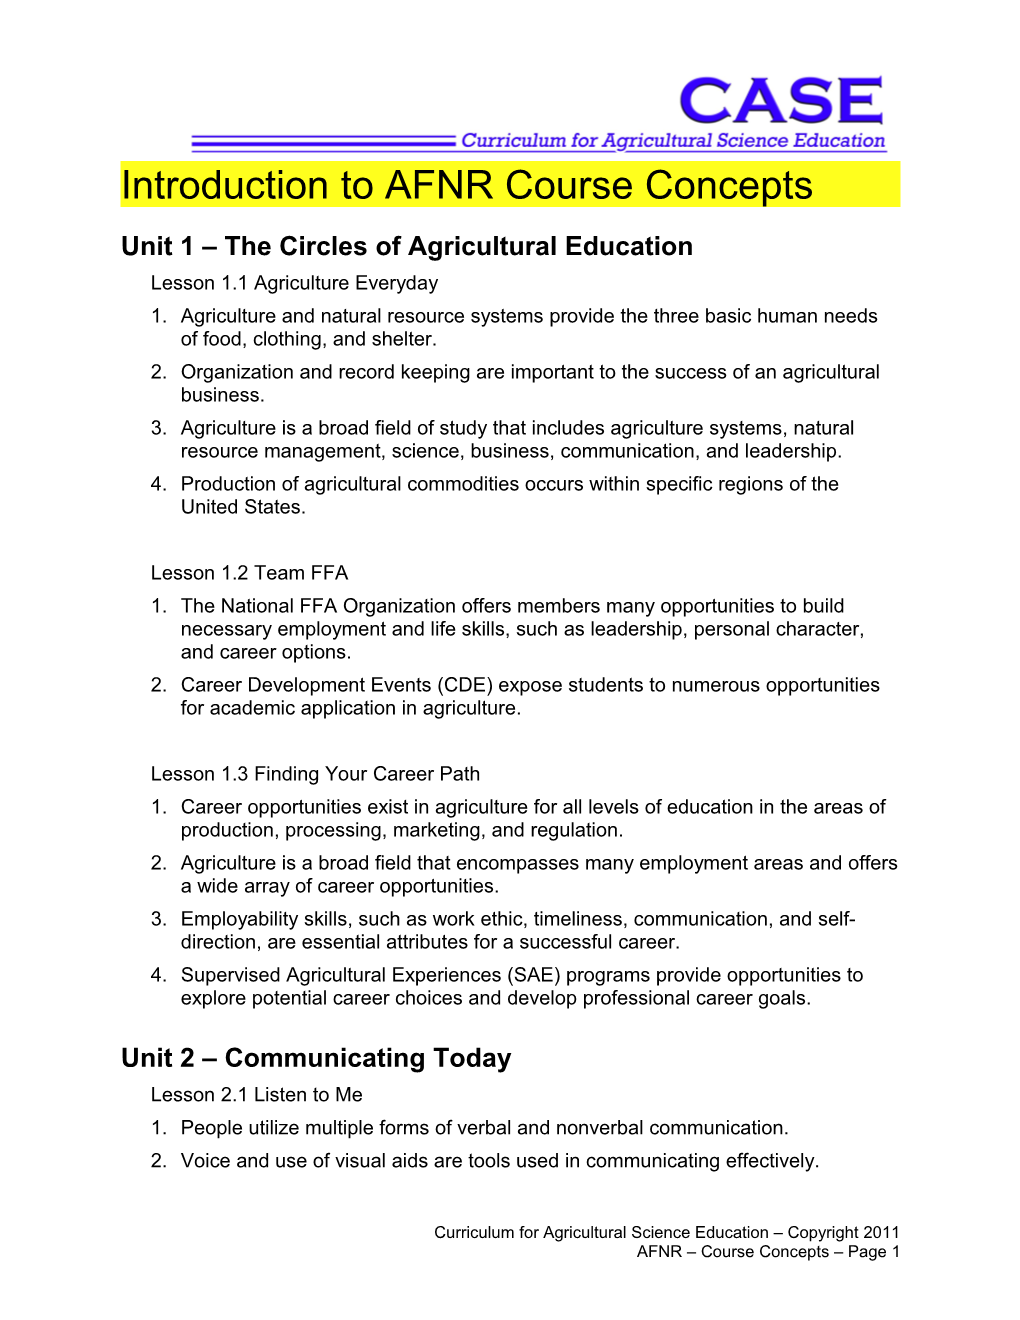 Intro to AFNR Course Outline